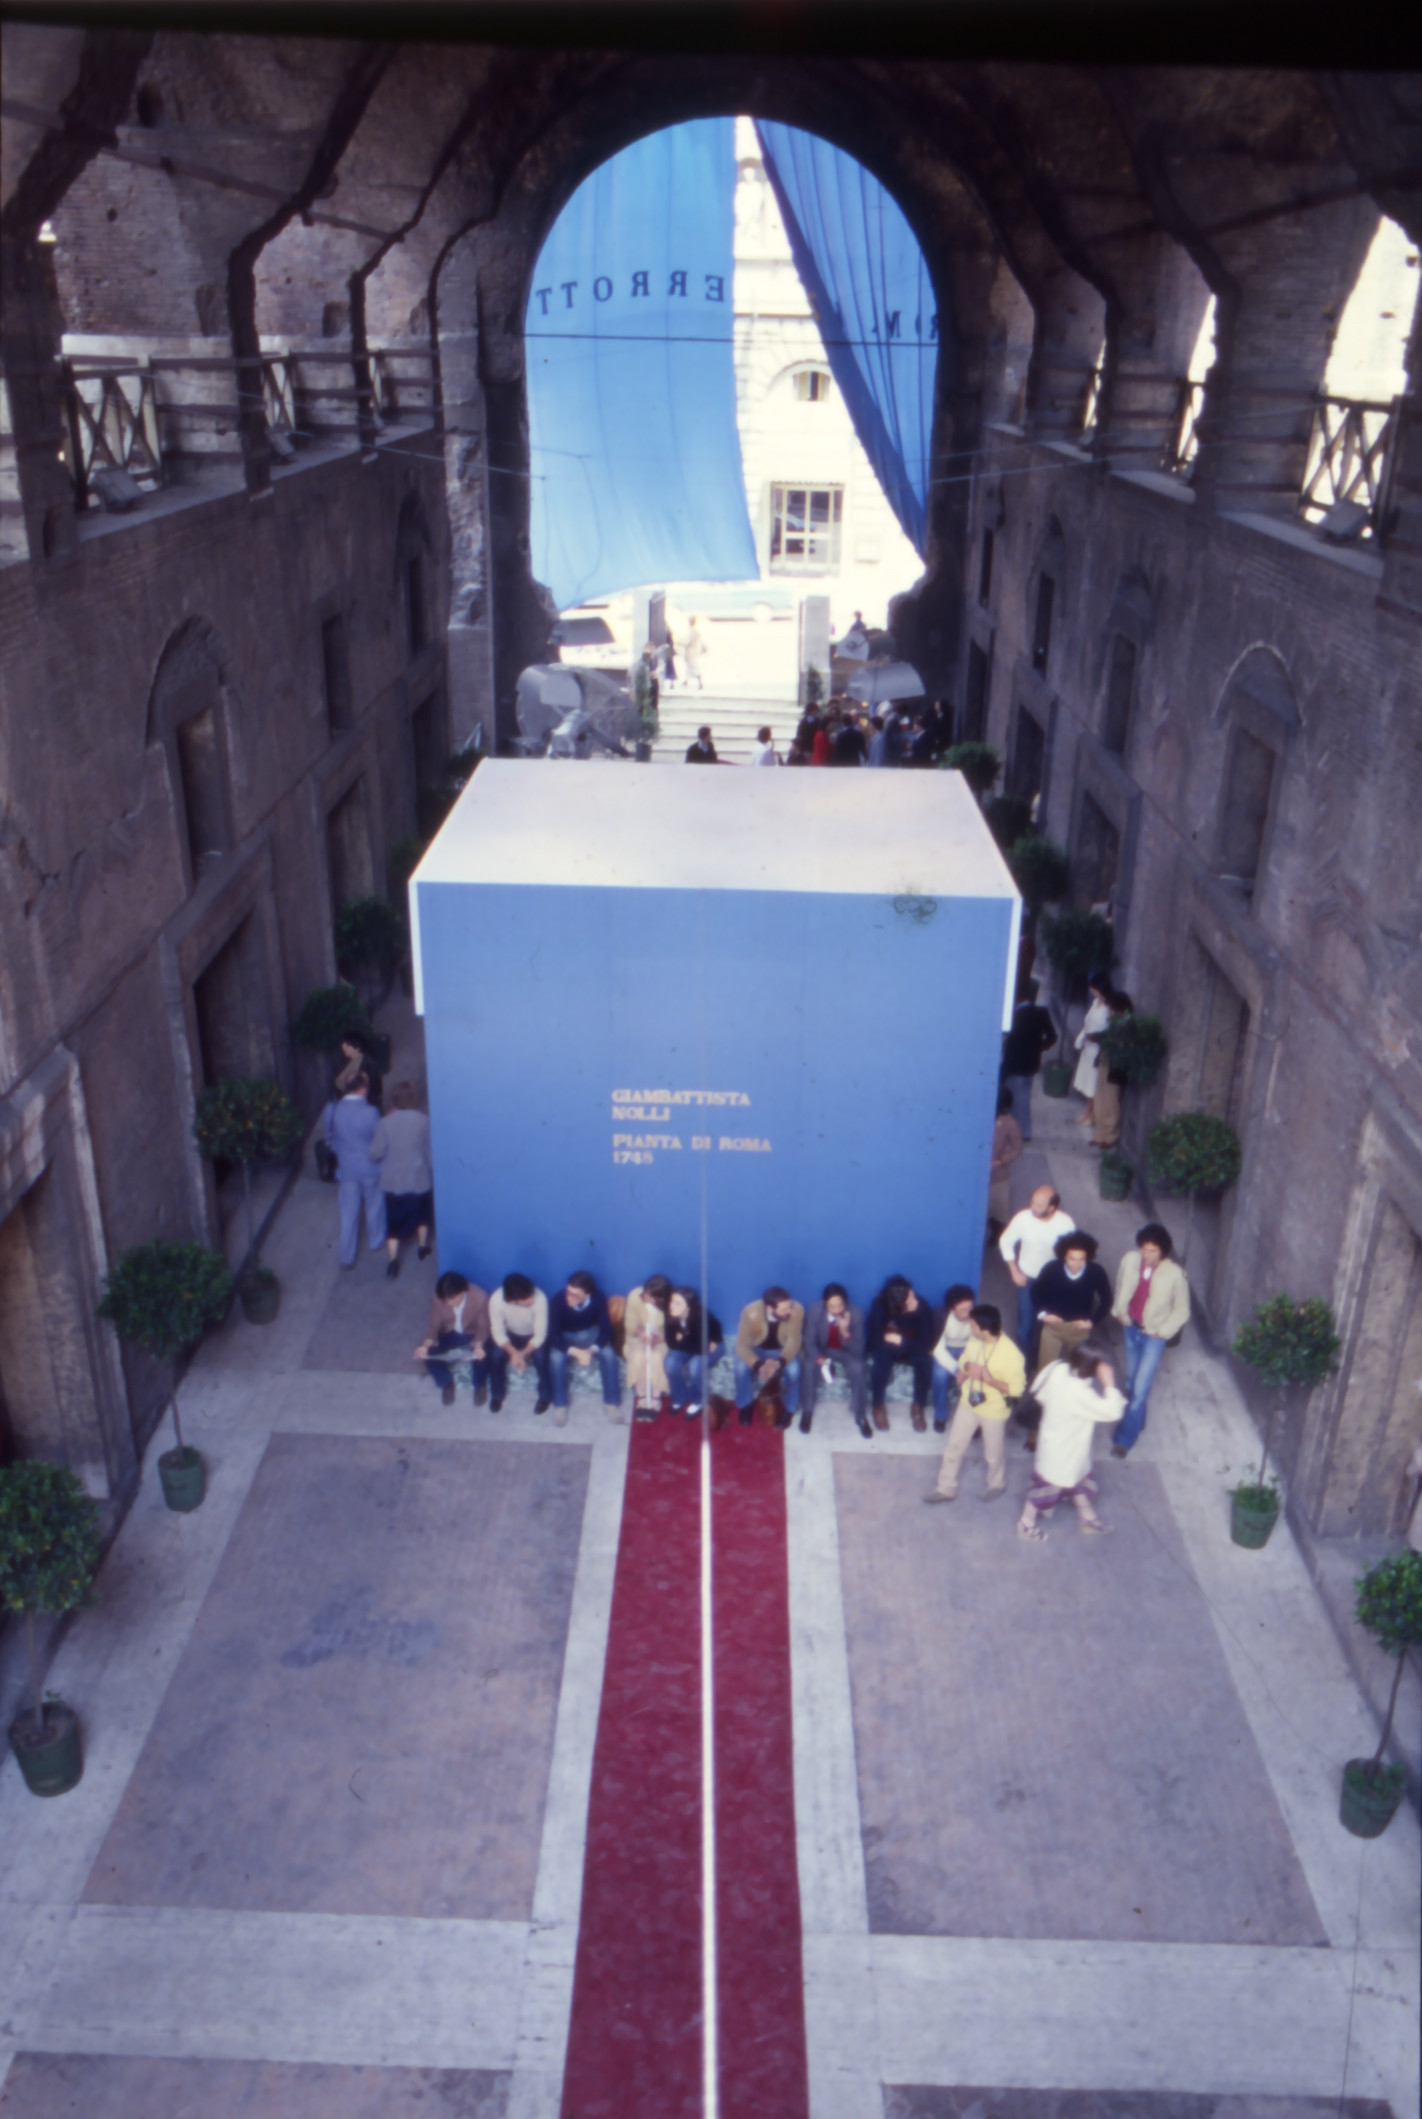 Entrance to the Mercati Traianei, the turquoise of the cube and the curtain contrasting with the red of the walkaway